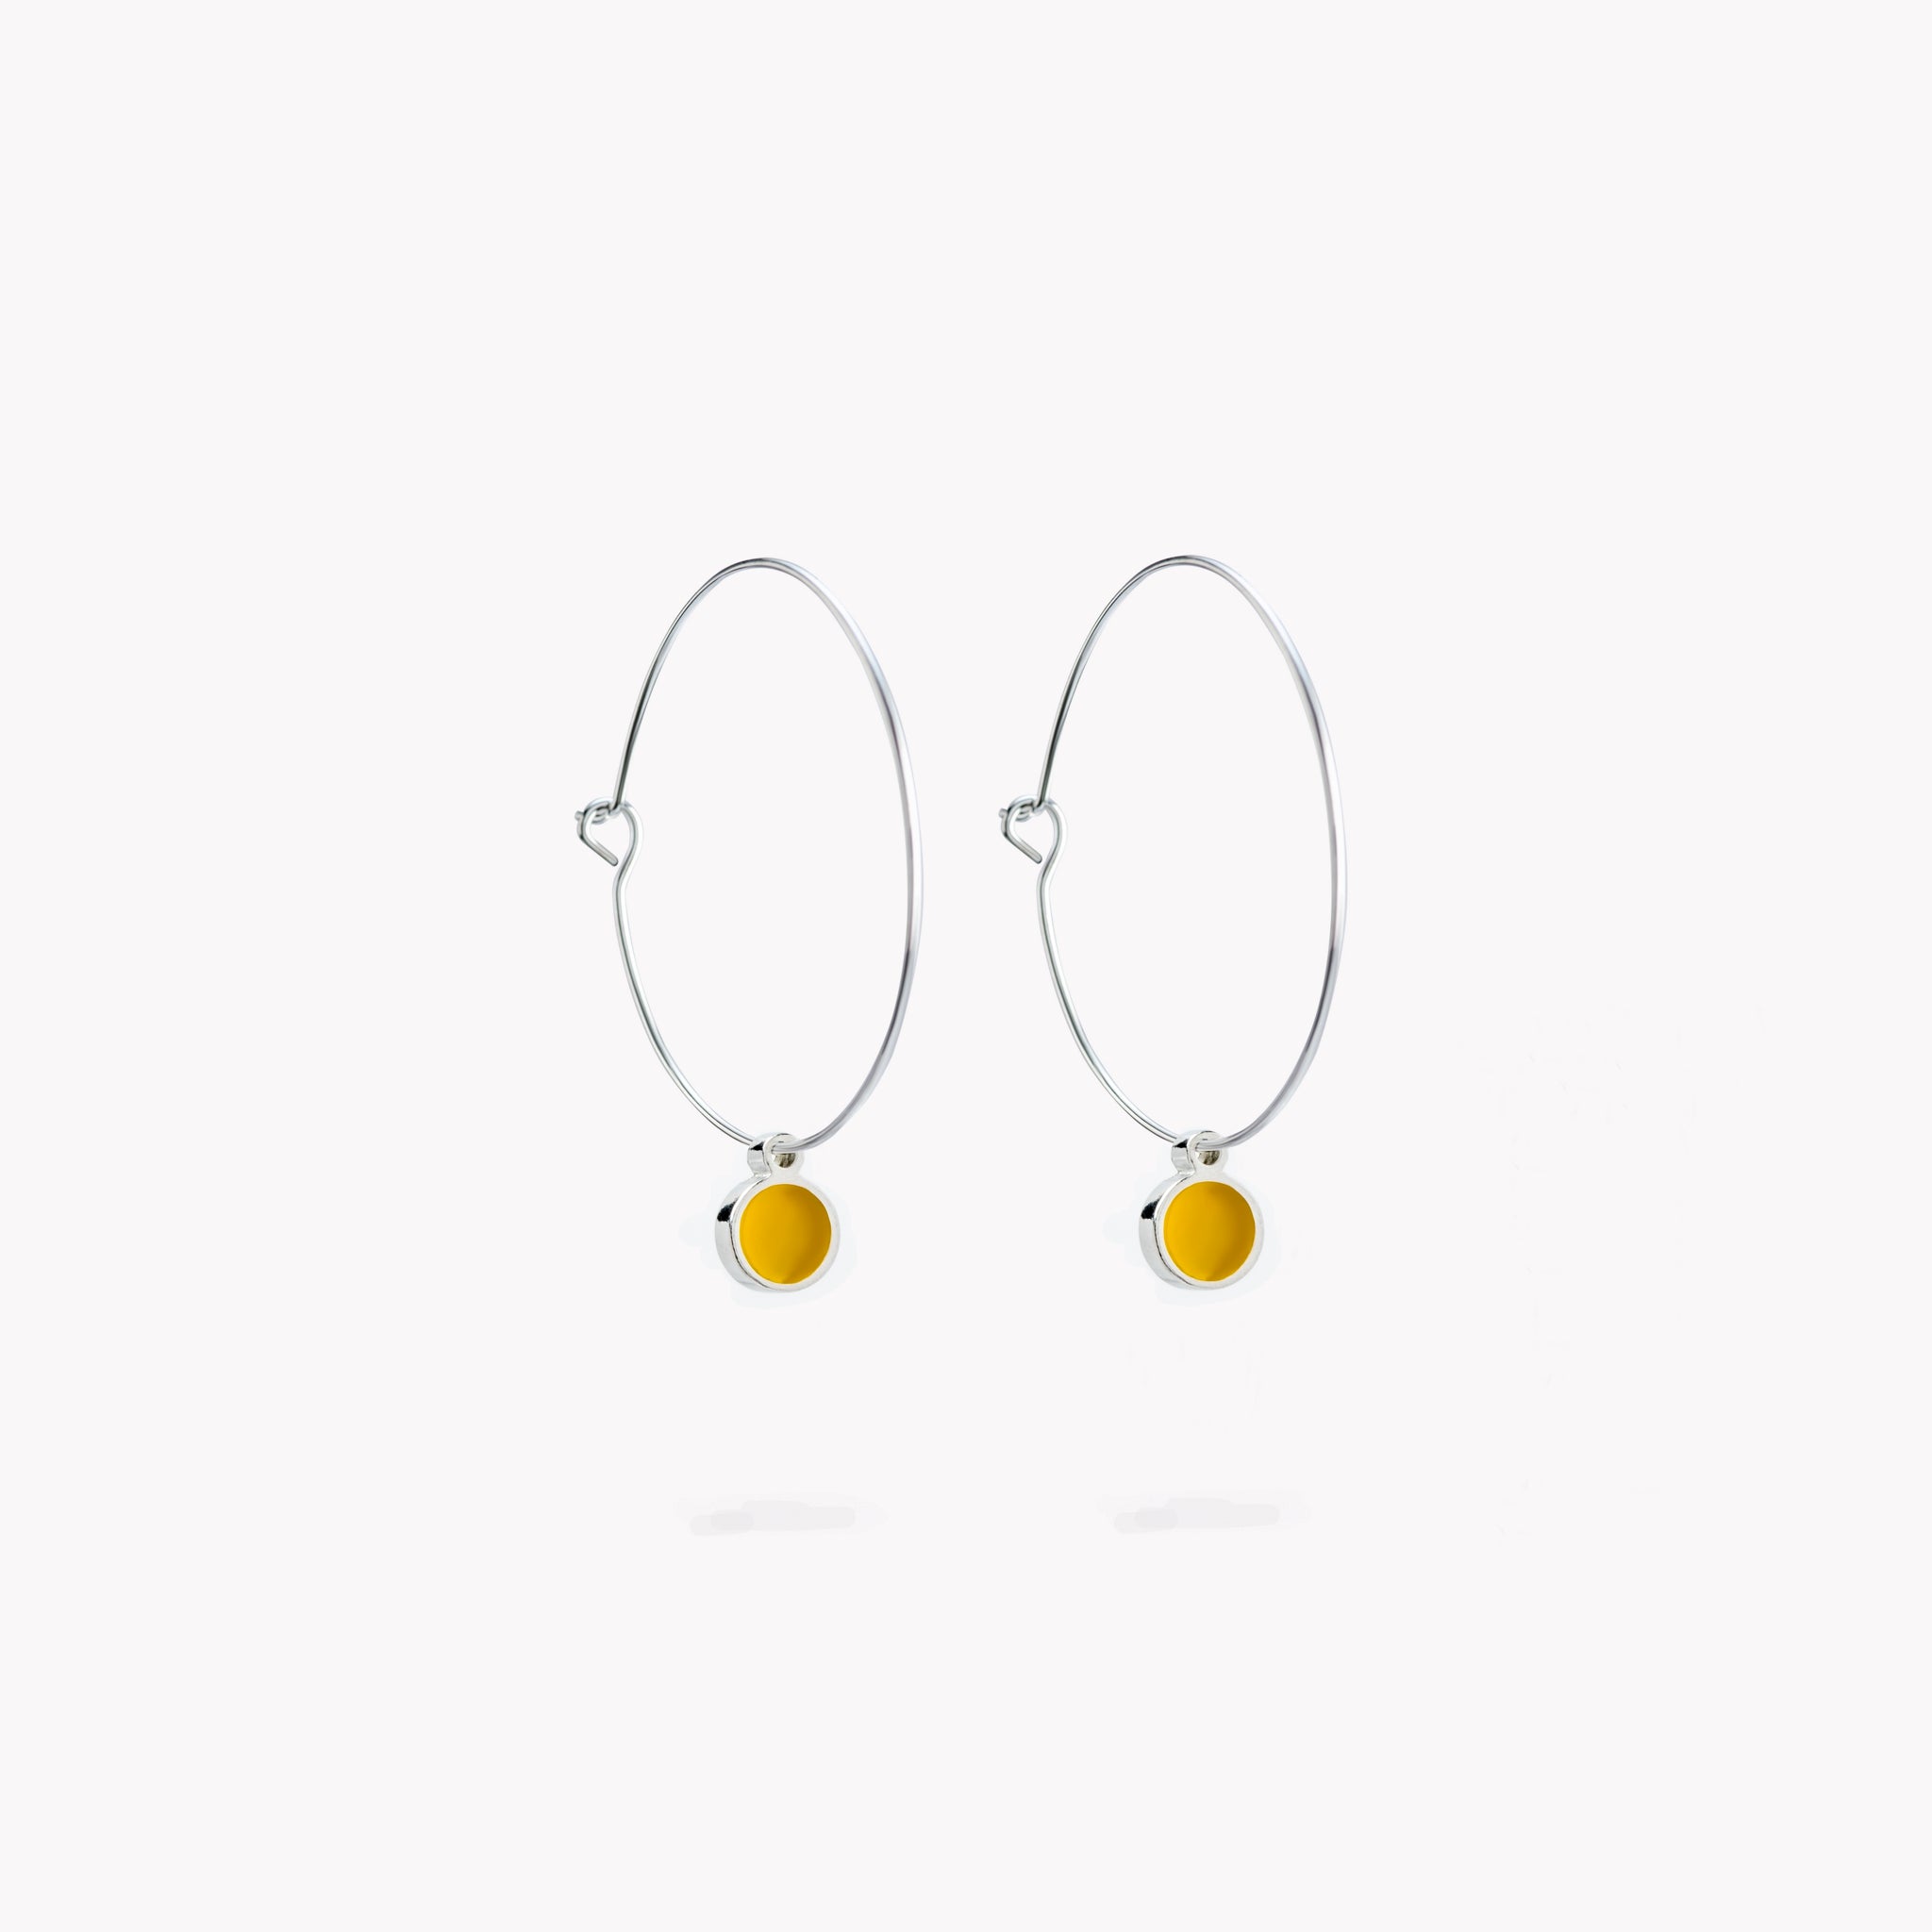 A pair of simple hoop earrings, each with a bright yellow hanging circular form.